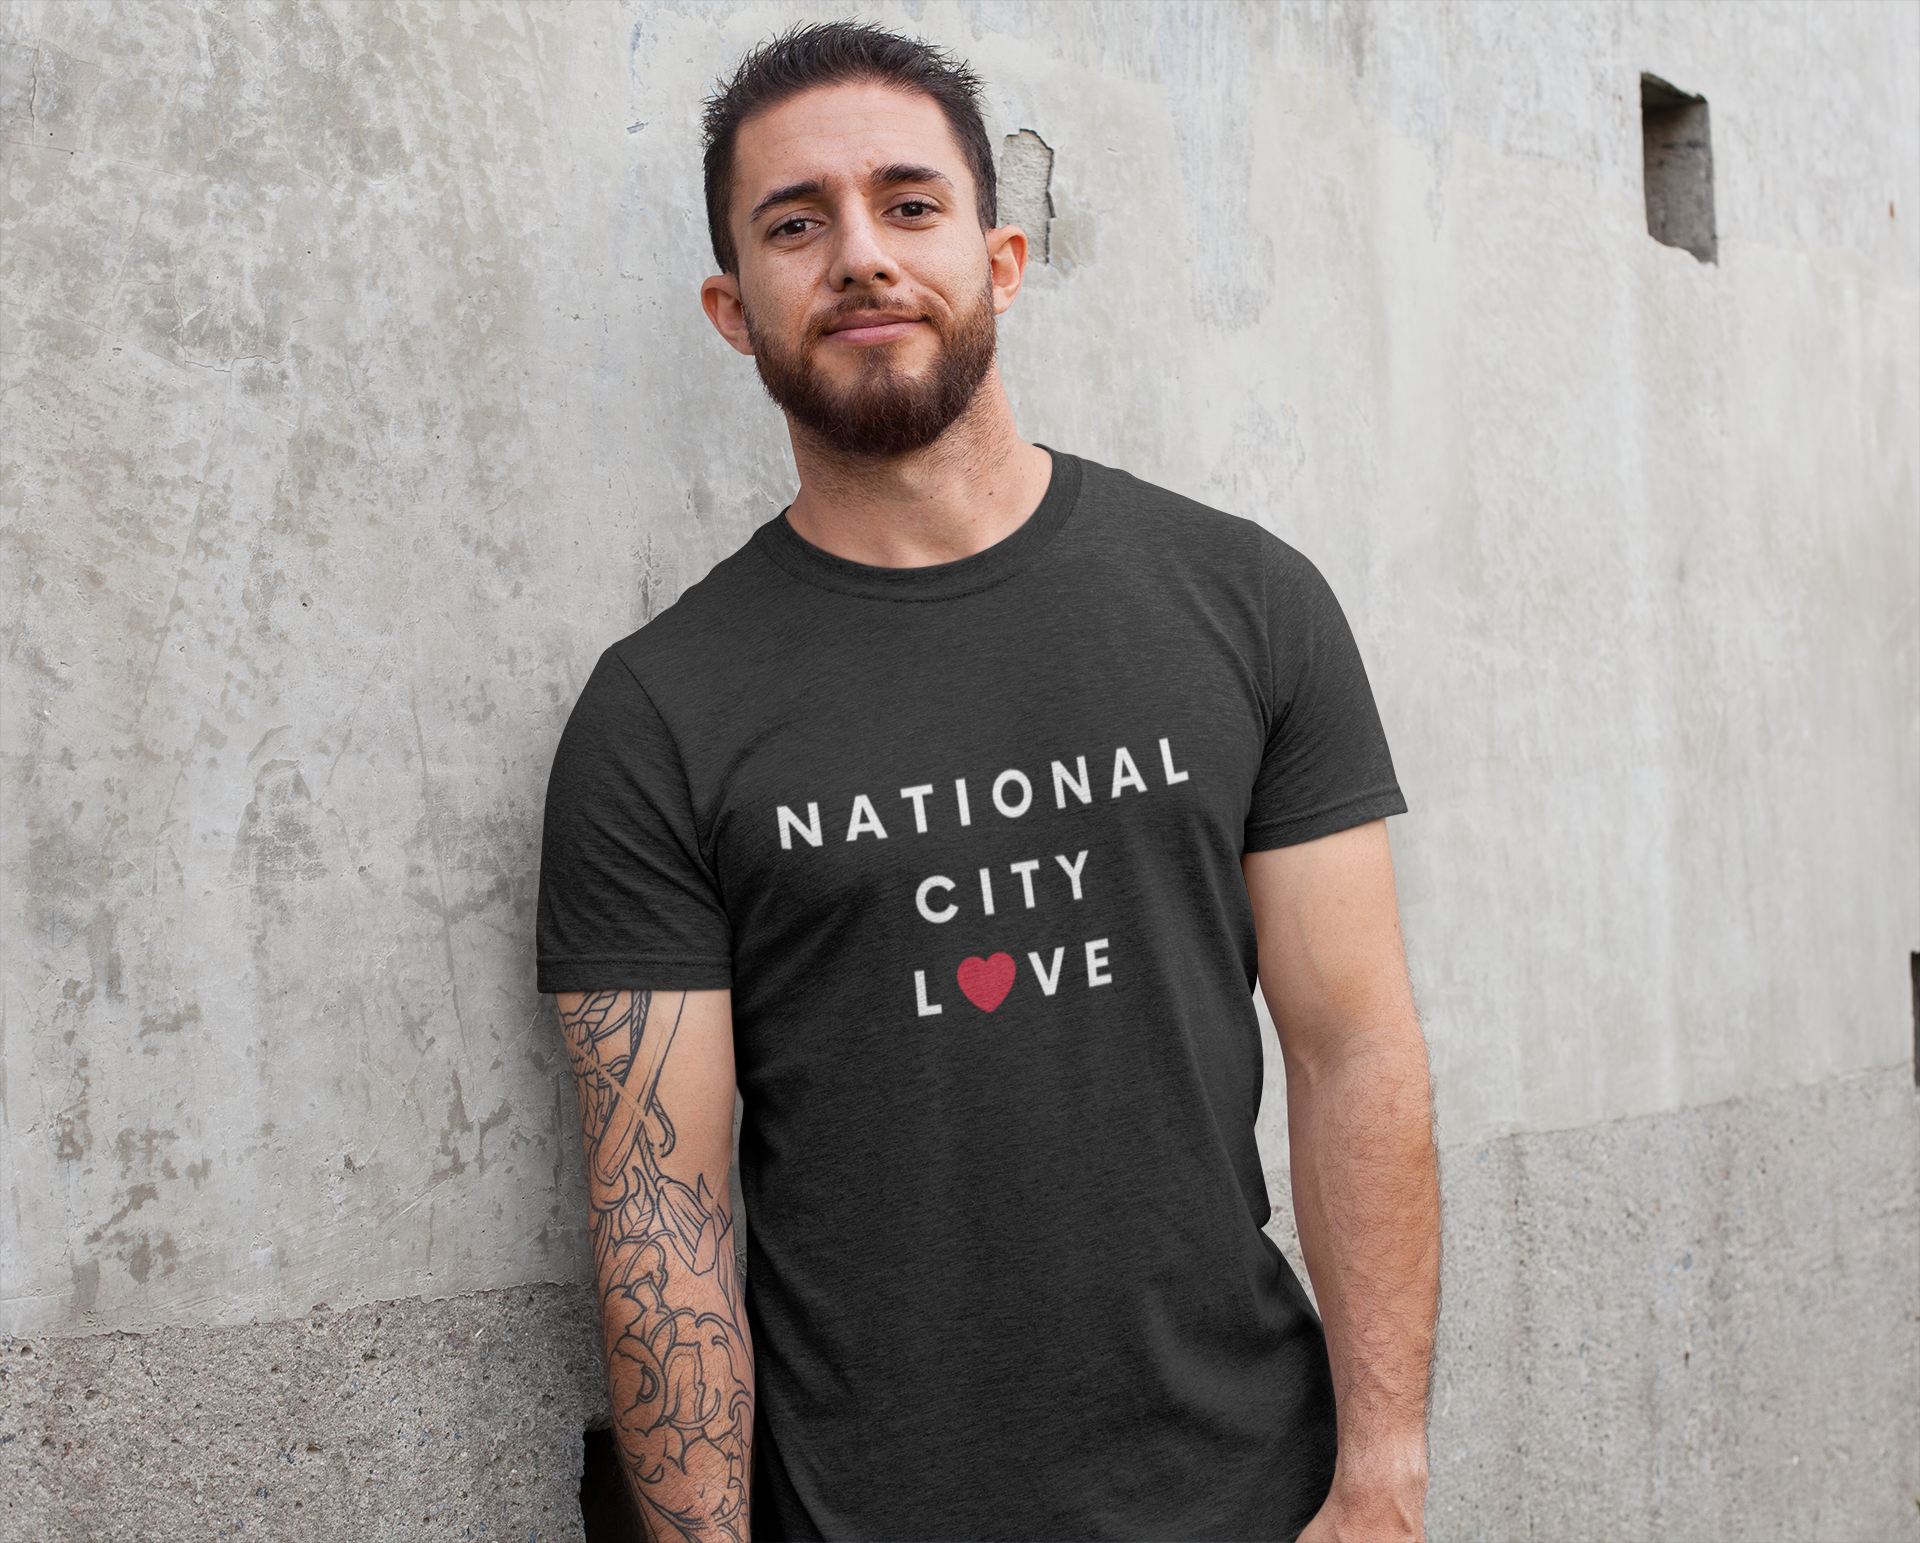 Tattooed guy standing again concrete wall wearing a National City t-shirt.